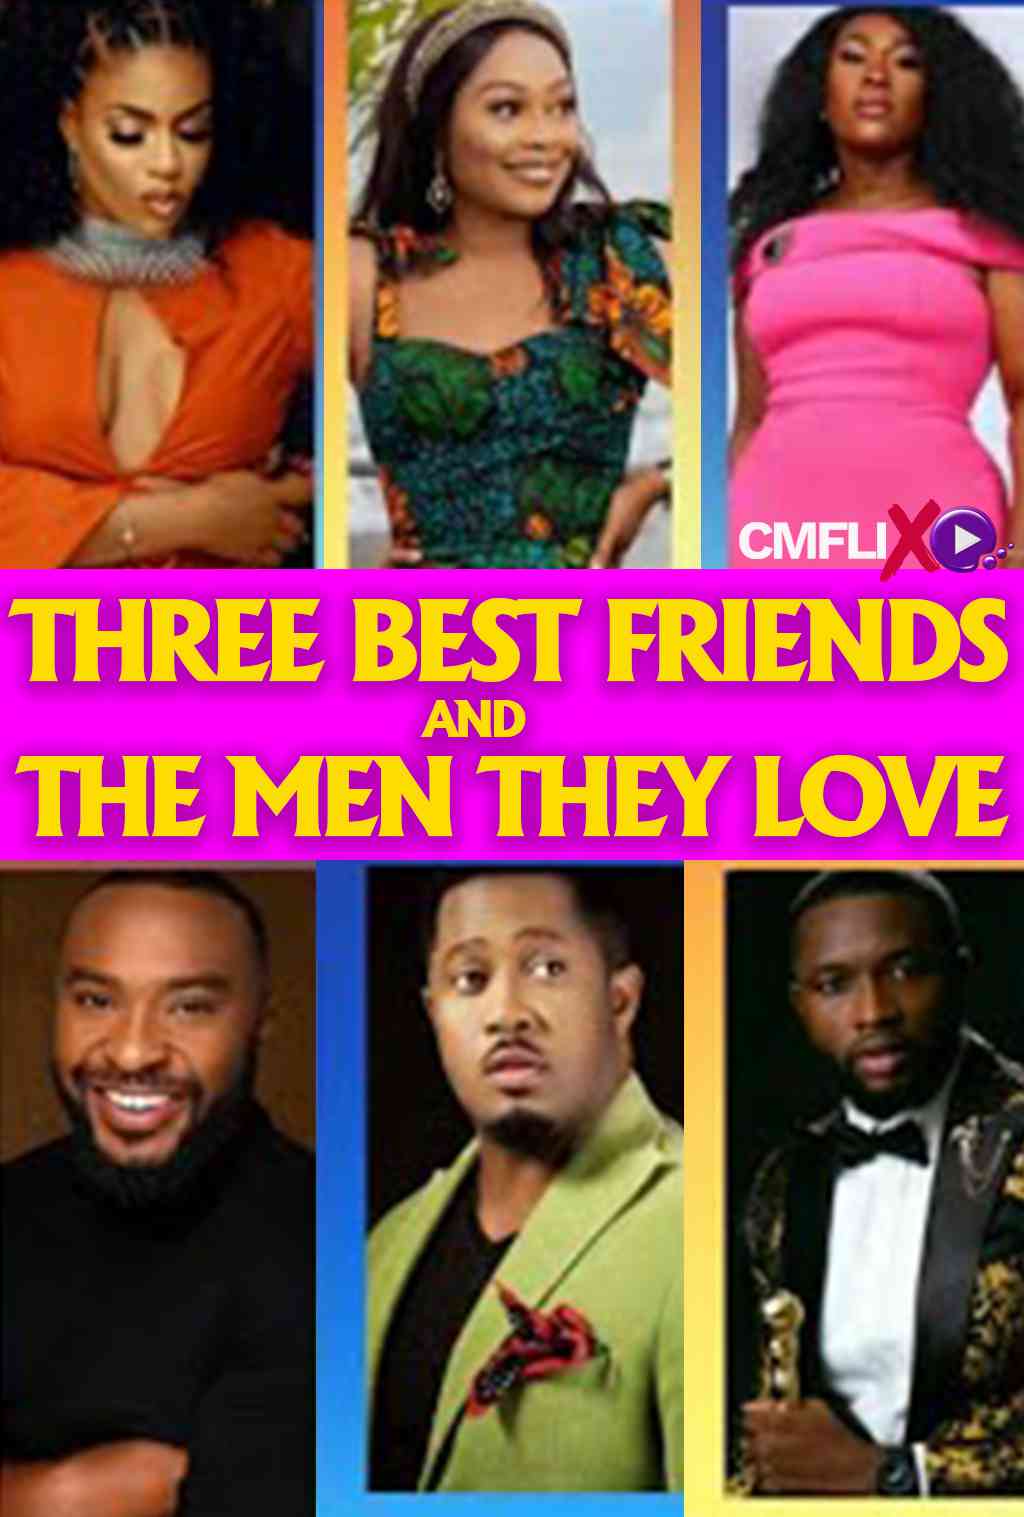 3 FRIENDS AND THE MEN THEY LOVE